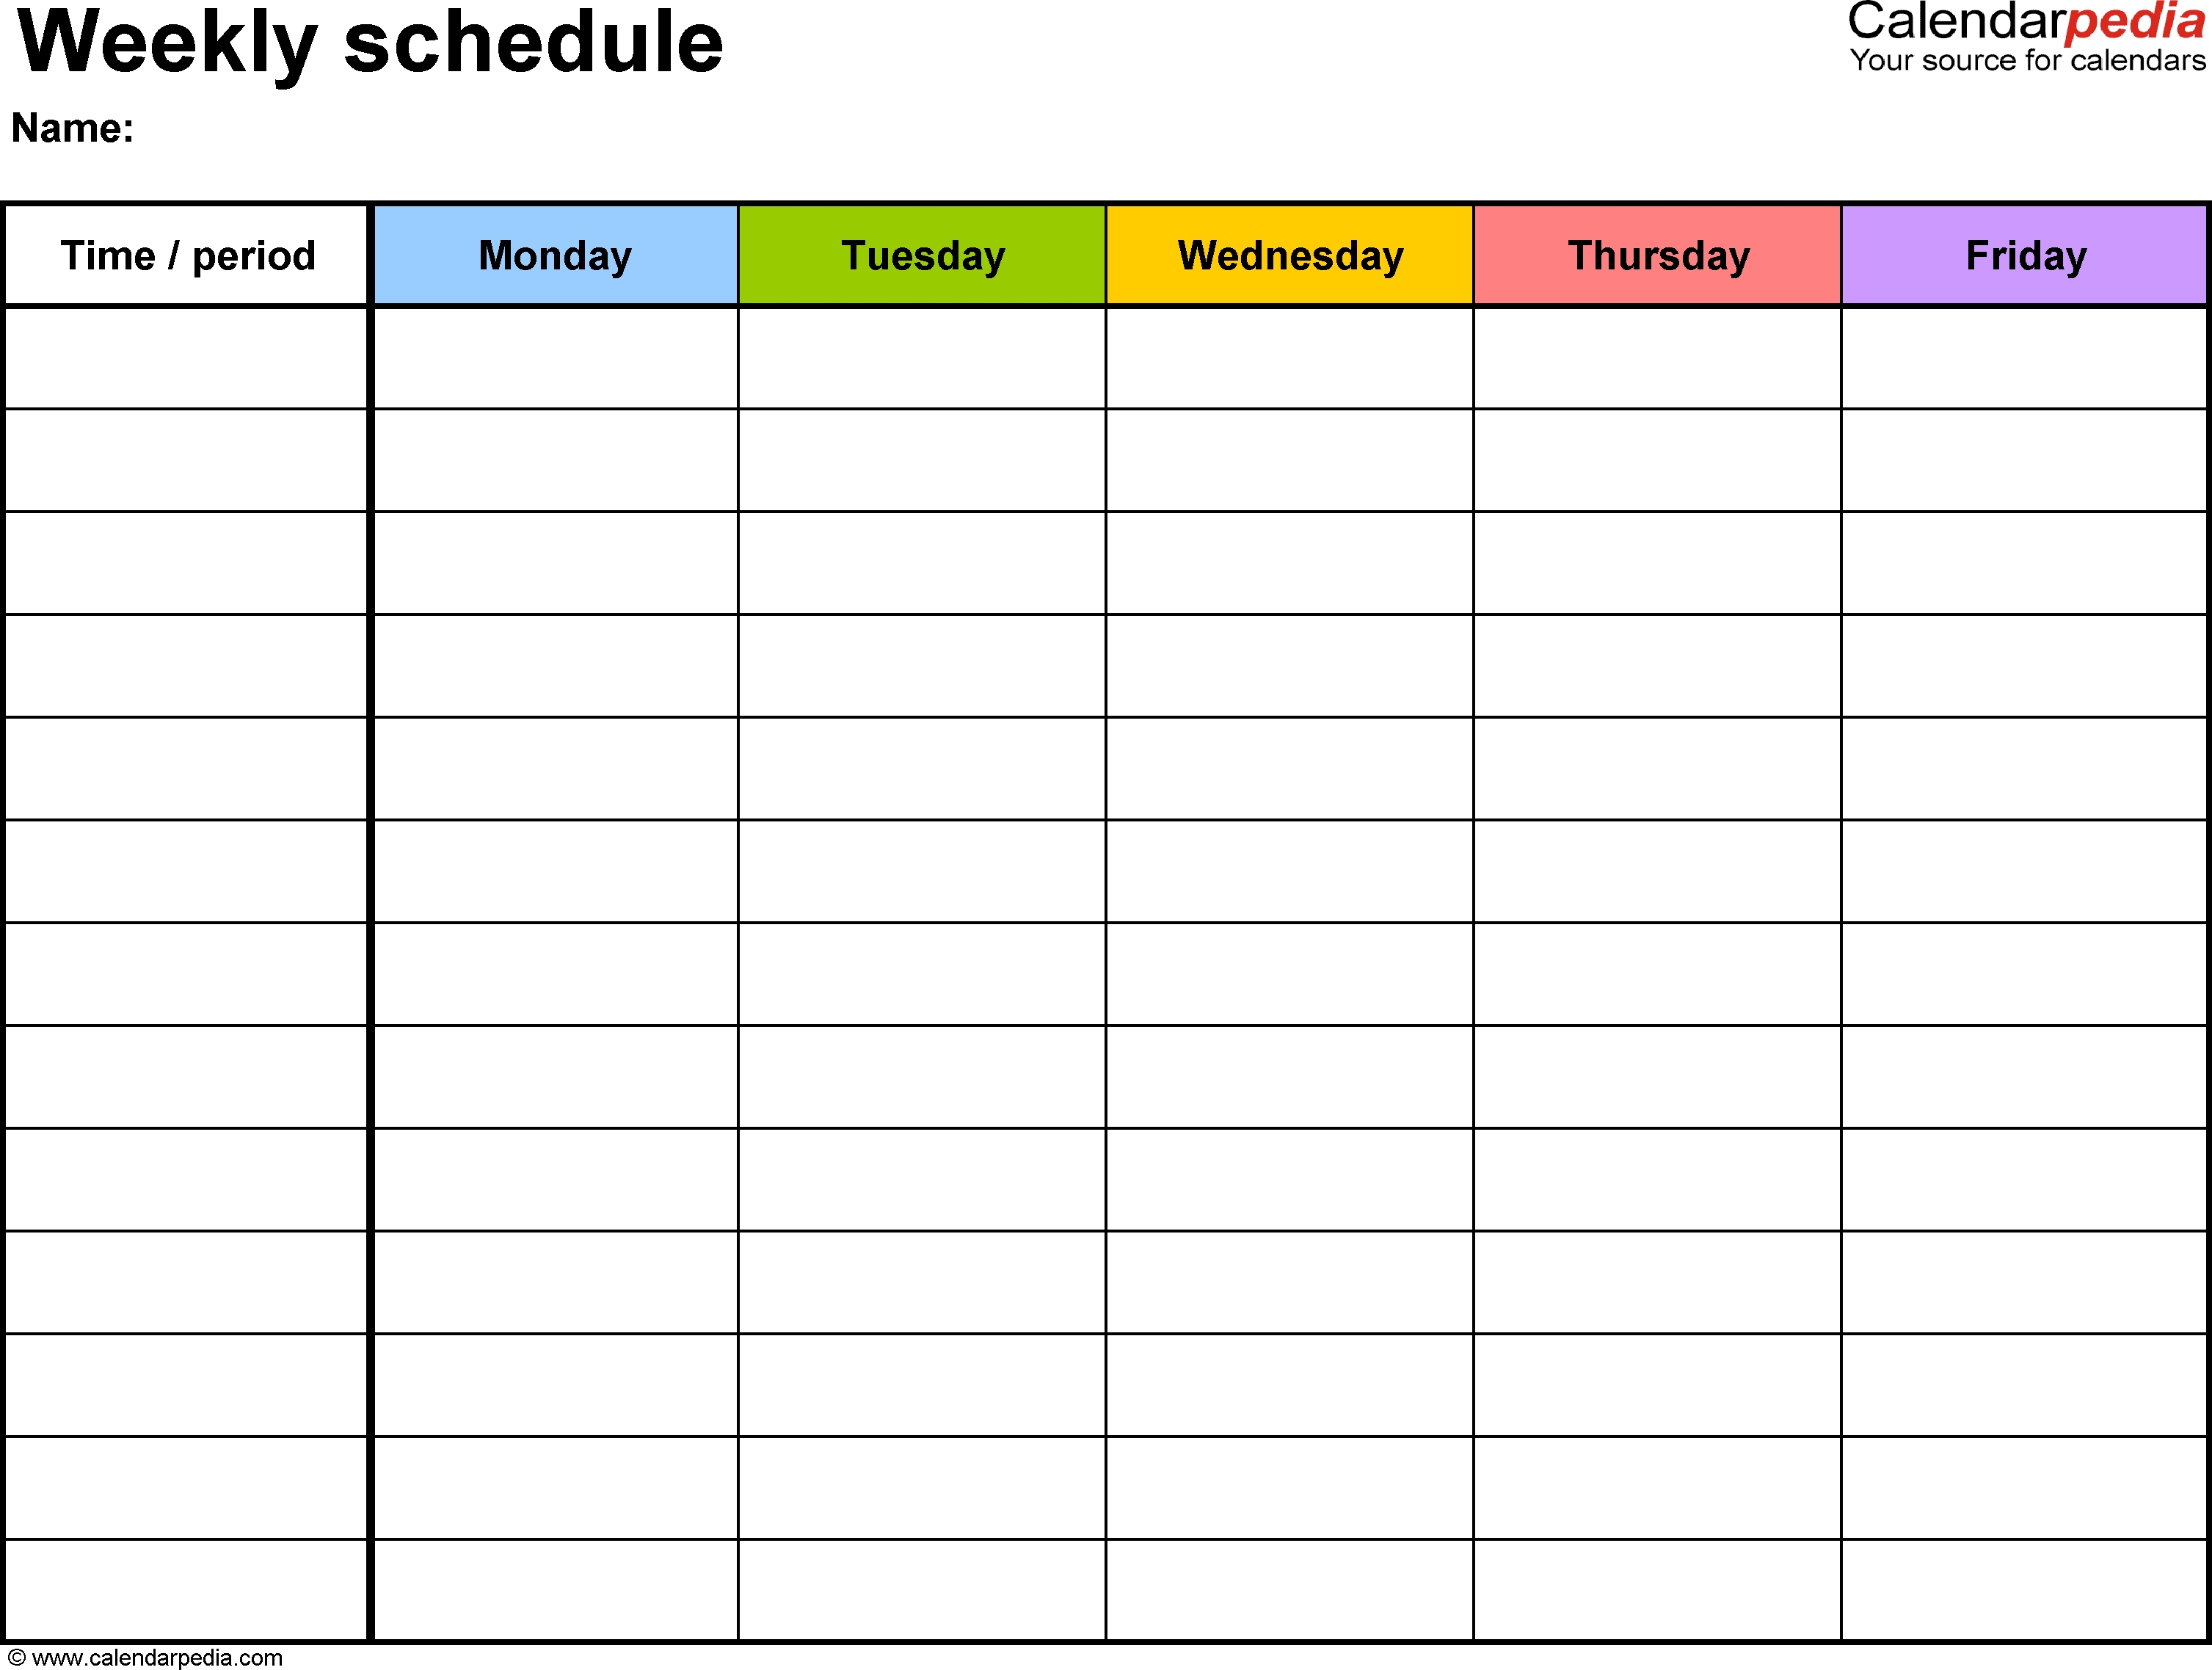 Free Weekly Schedule Templates For Word - 18 Templates  Monthly Calendar Templates Monday To Friday